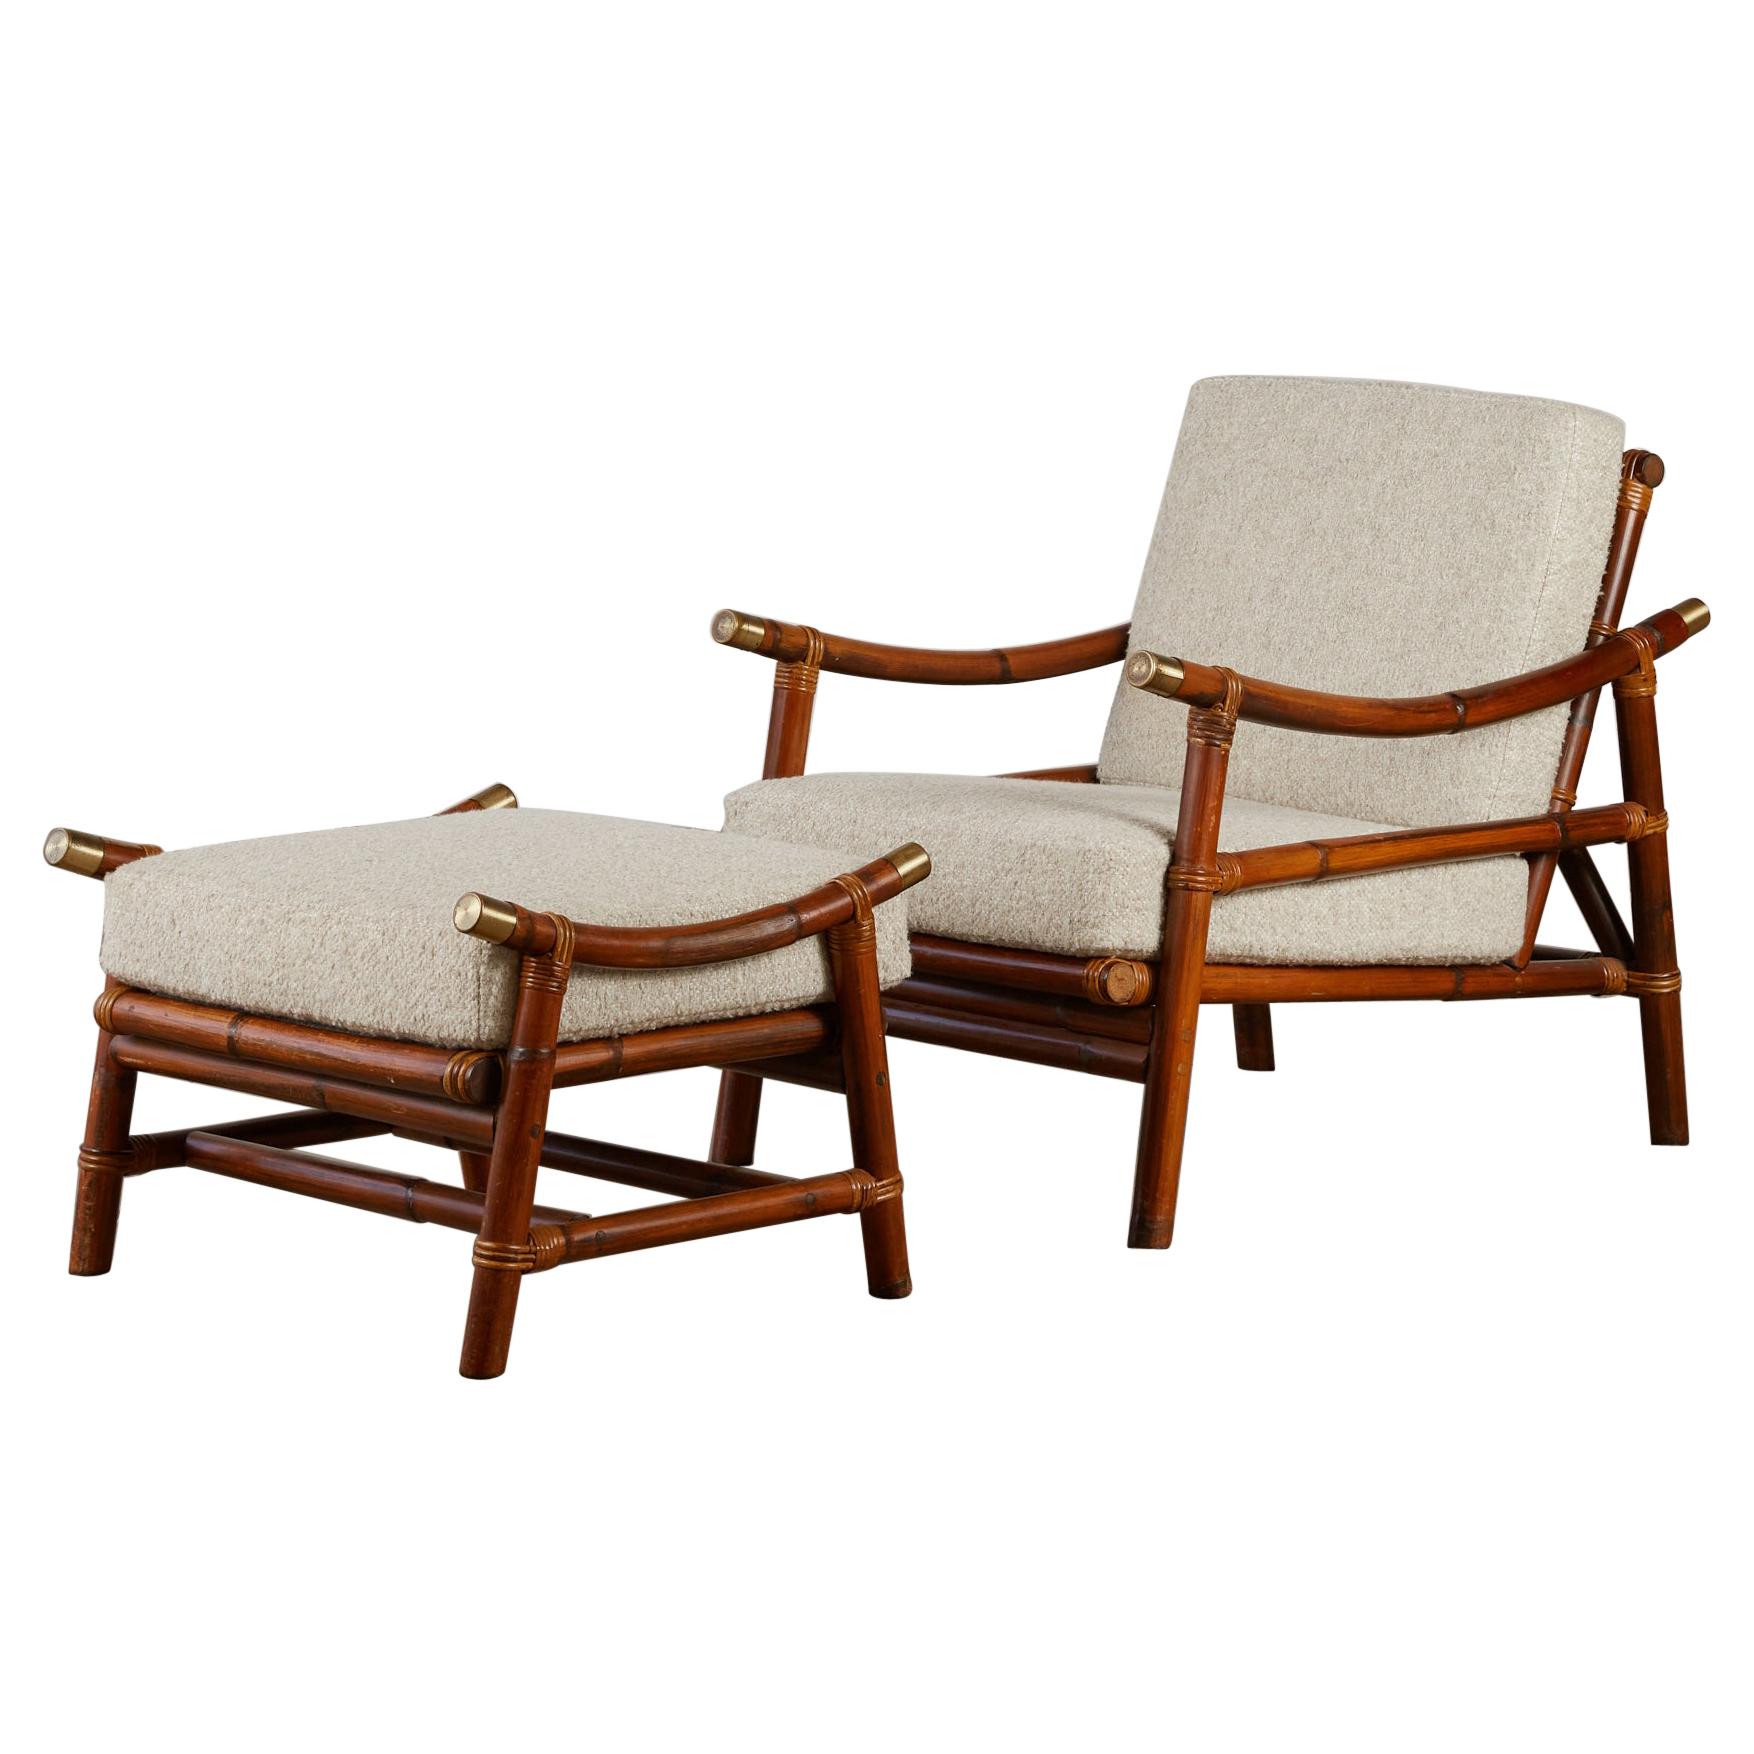 John Wisner for Ficks Reed Lounge Chair and Ottoman